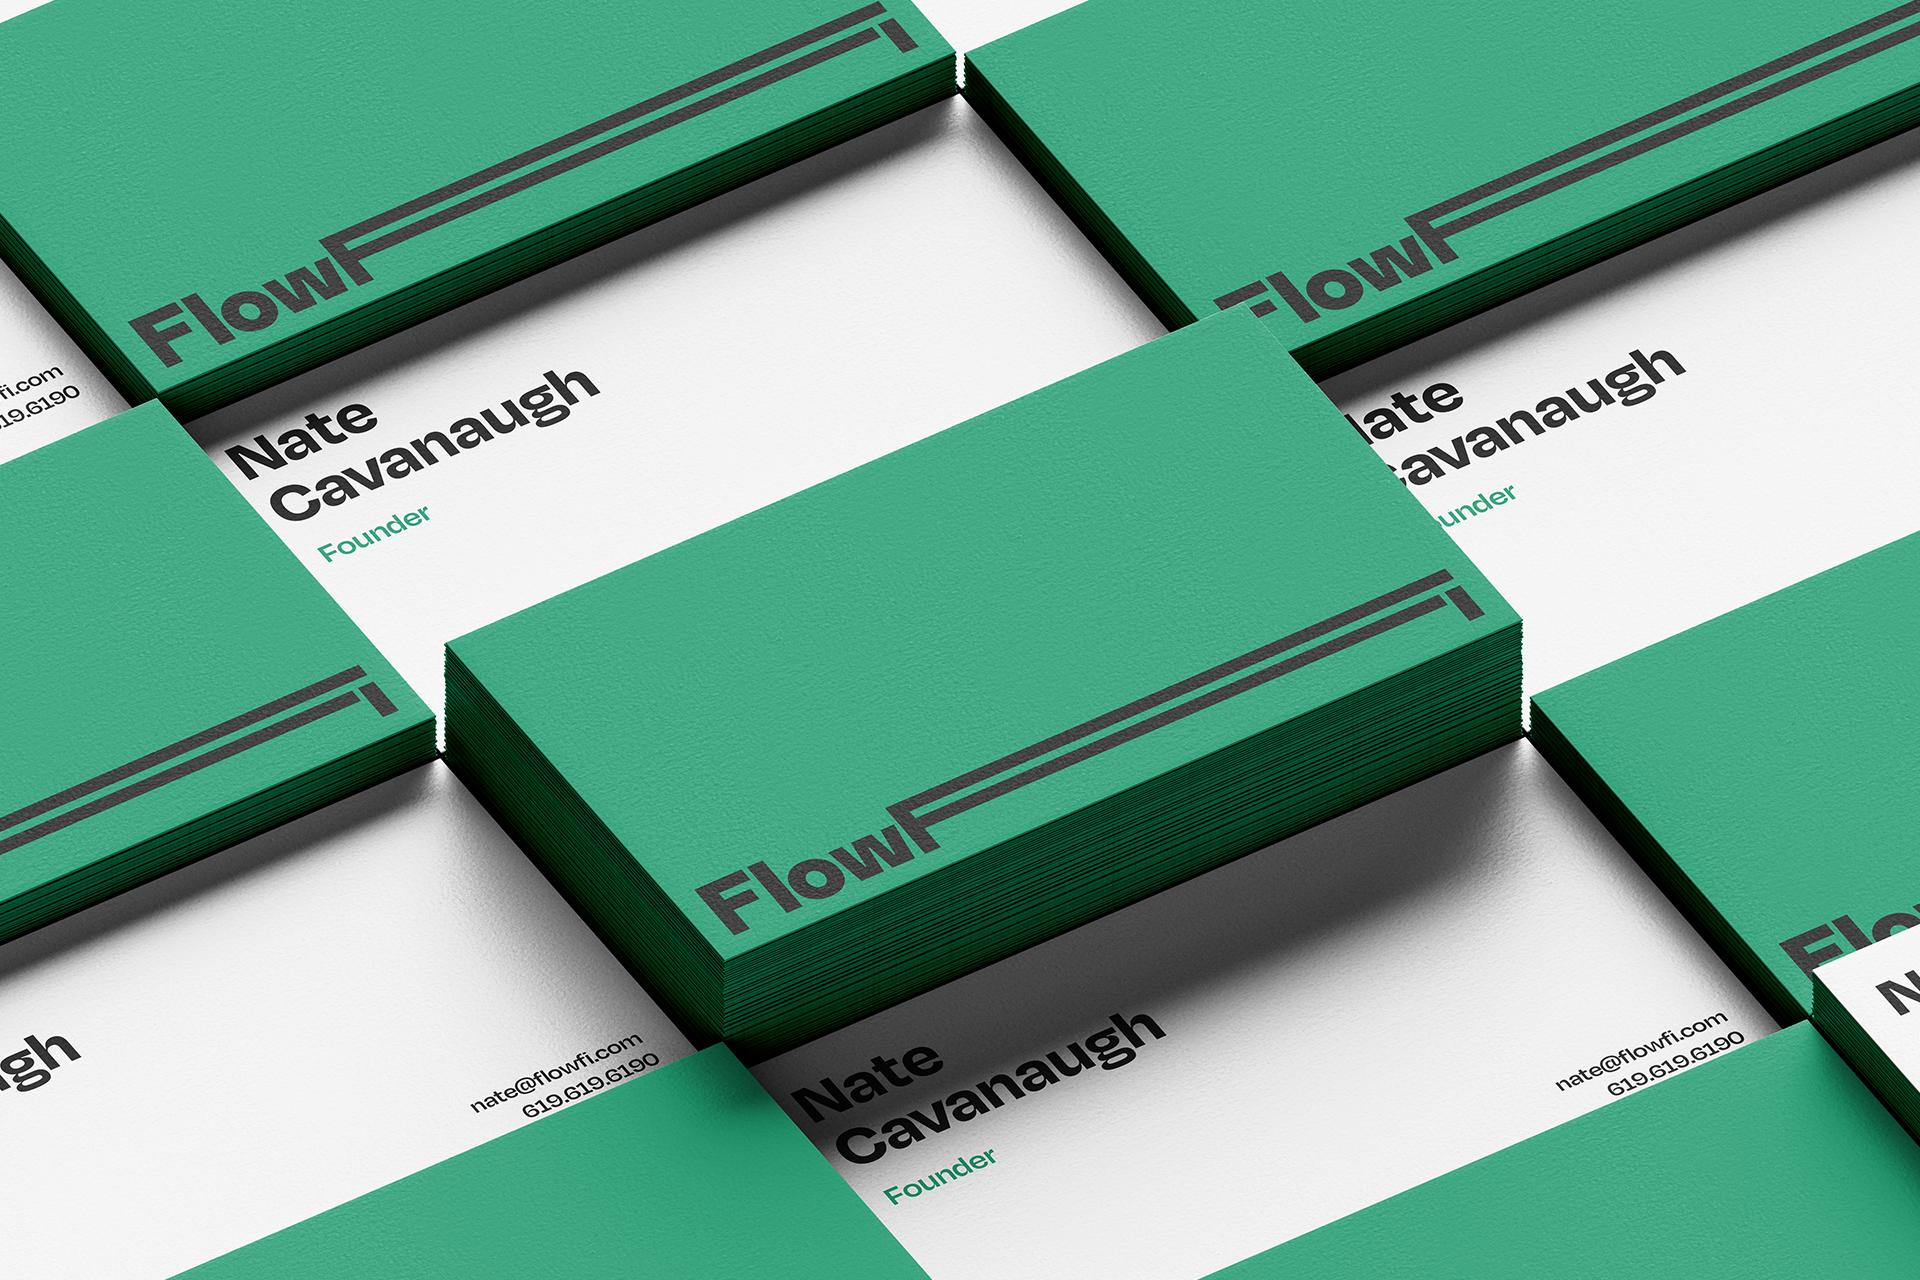 FlowFi Secures $9 Million In Seed Funding To Provide Founders With Financial Insights